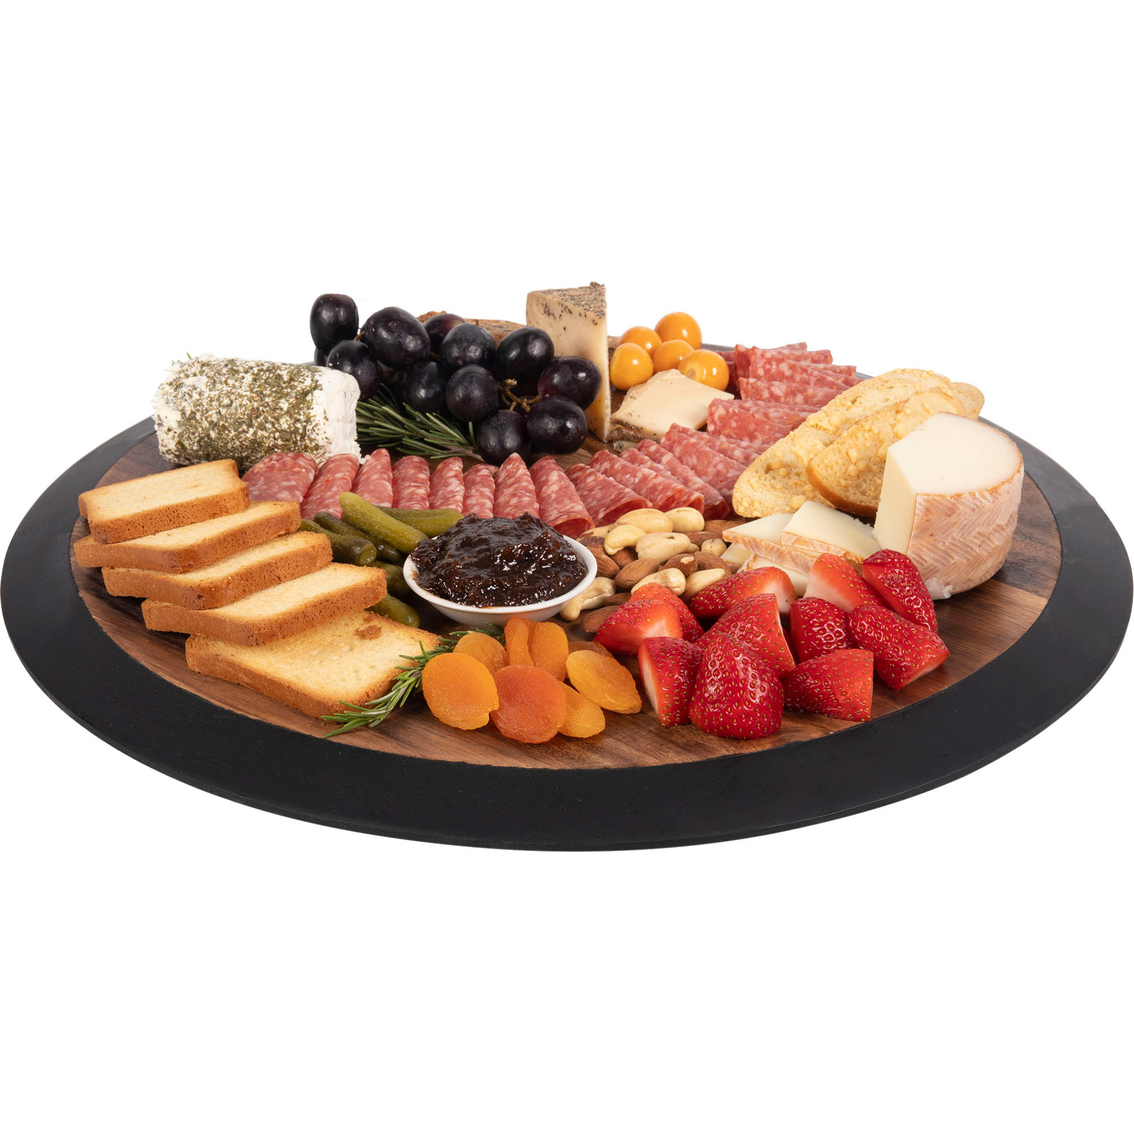 Picnic Time Toscana Lazy Susan Serving Tray - Image 4 of 7